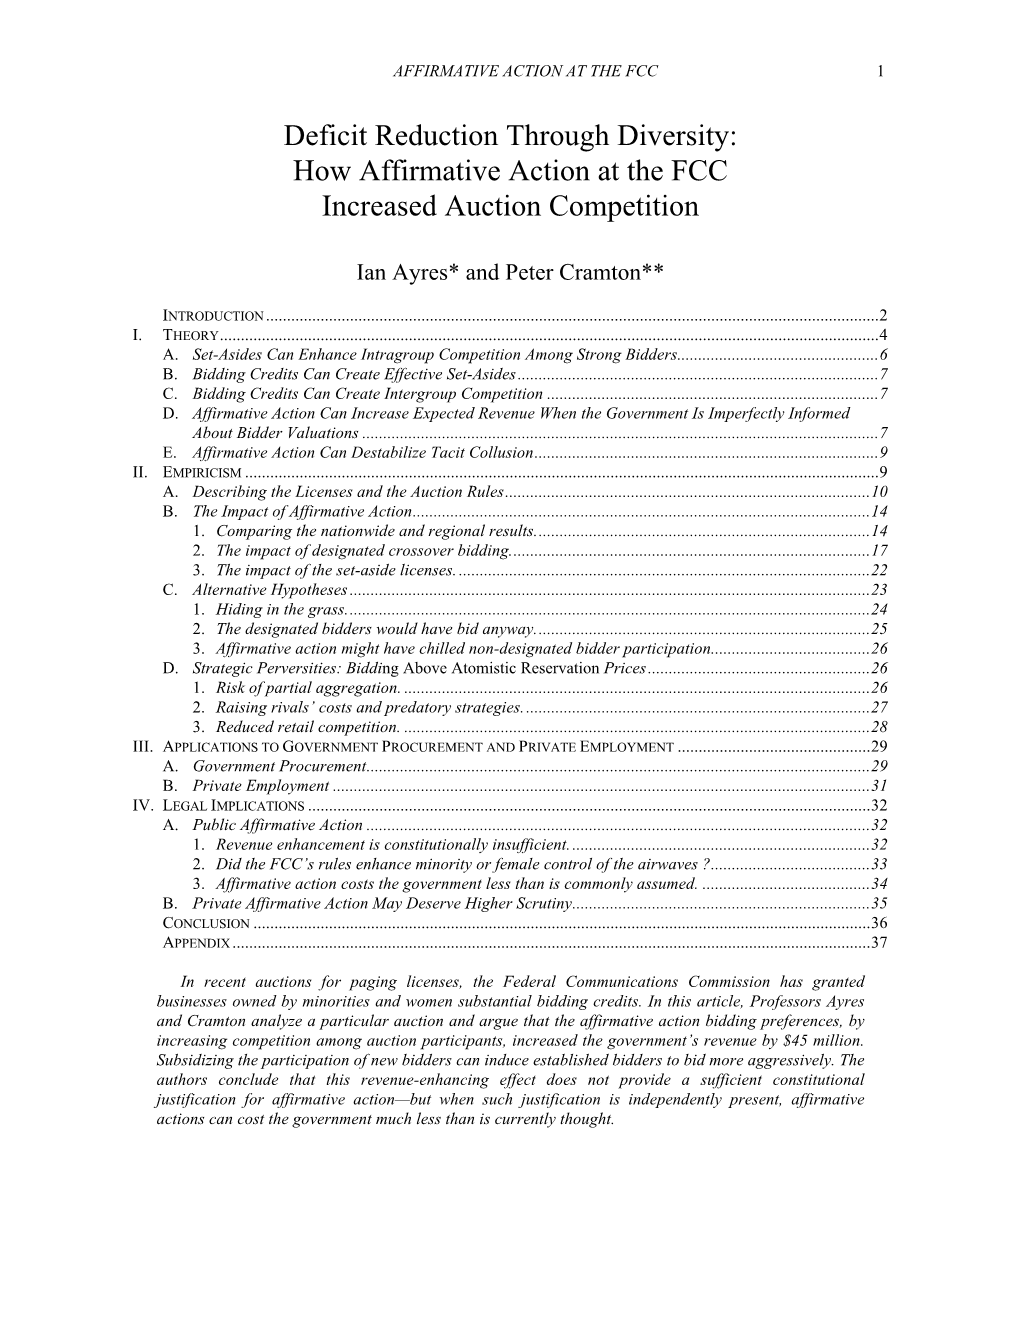 Deficit Reduction Through Diversity: How Affirmative Action at the FCC Increased Auction Competition